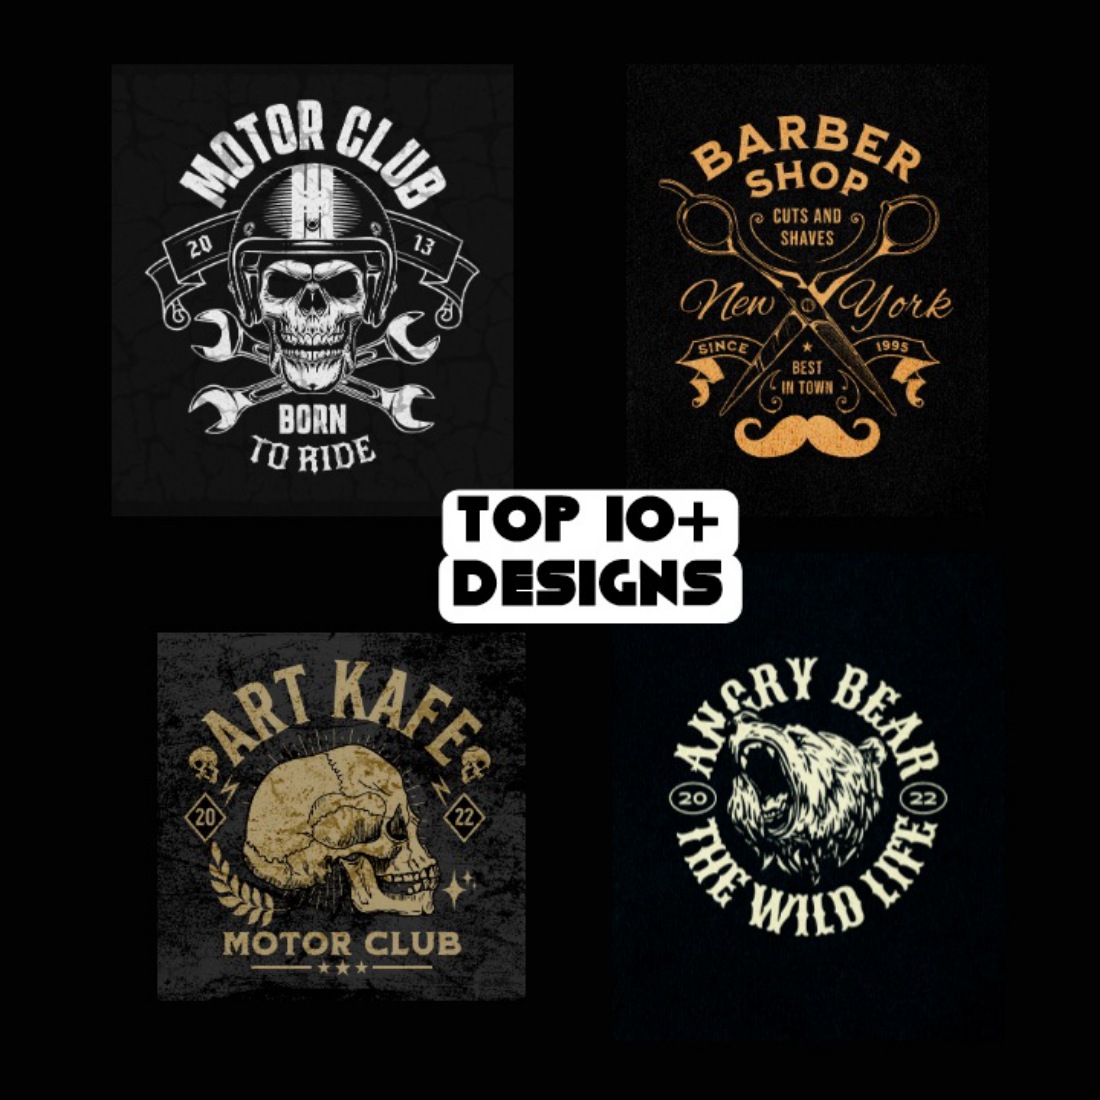 Top 10+ vintage t shirts designs cover image.